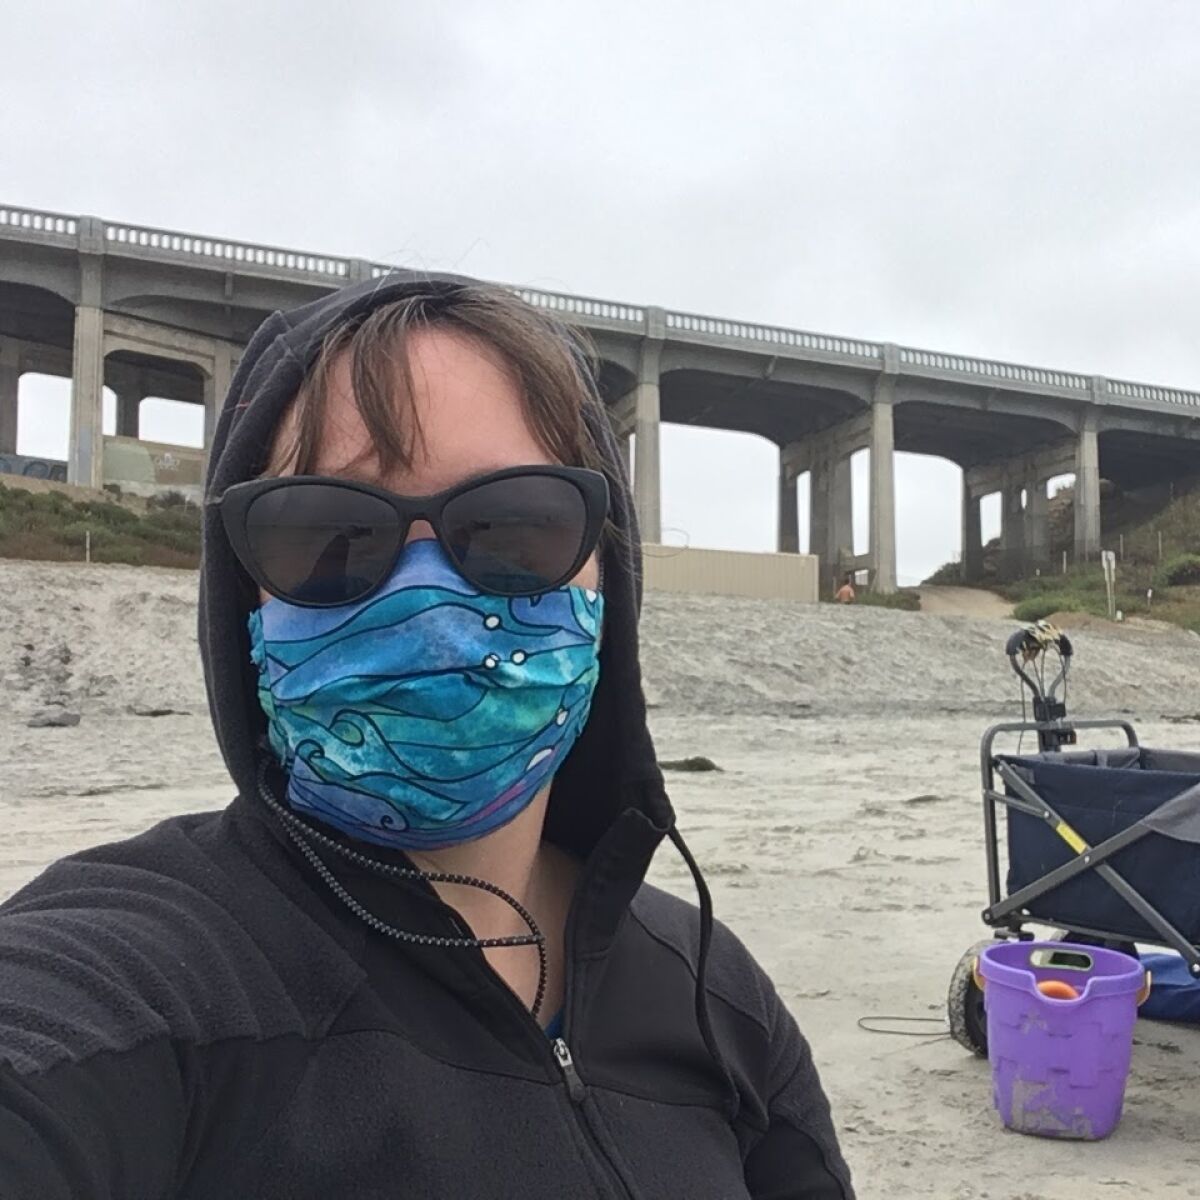 Del Mar resident Kimberly Hiland-Belding has made more than 300 masks since the pandemic started.